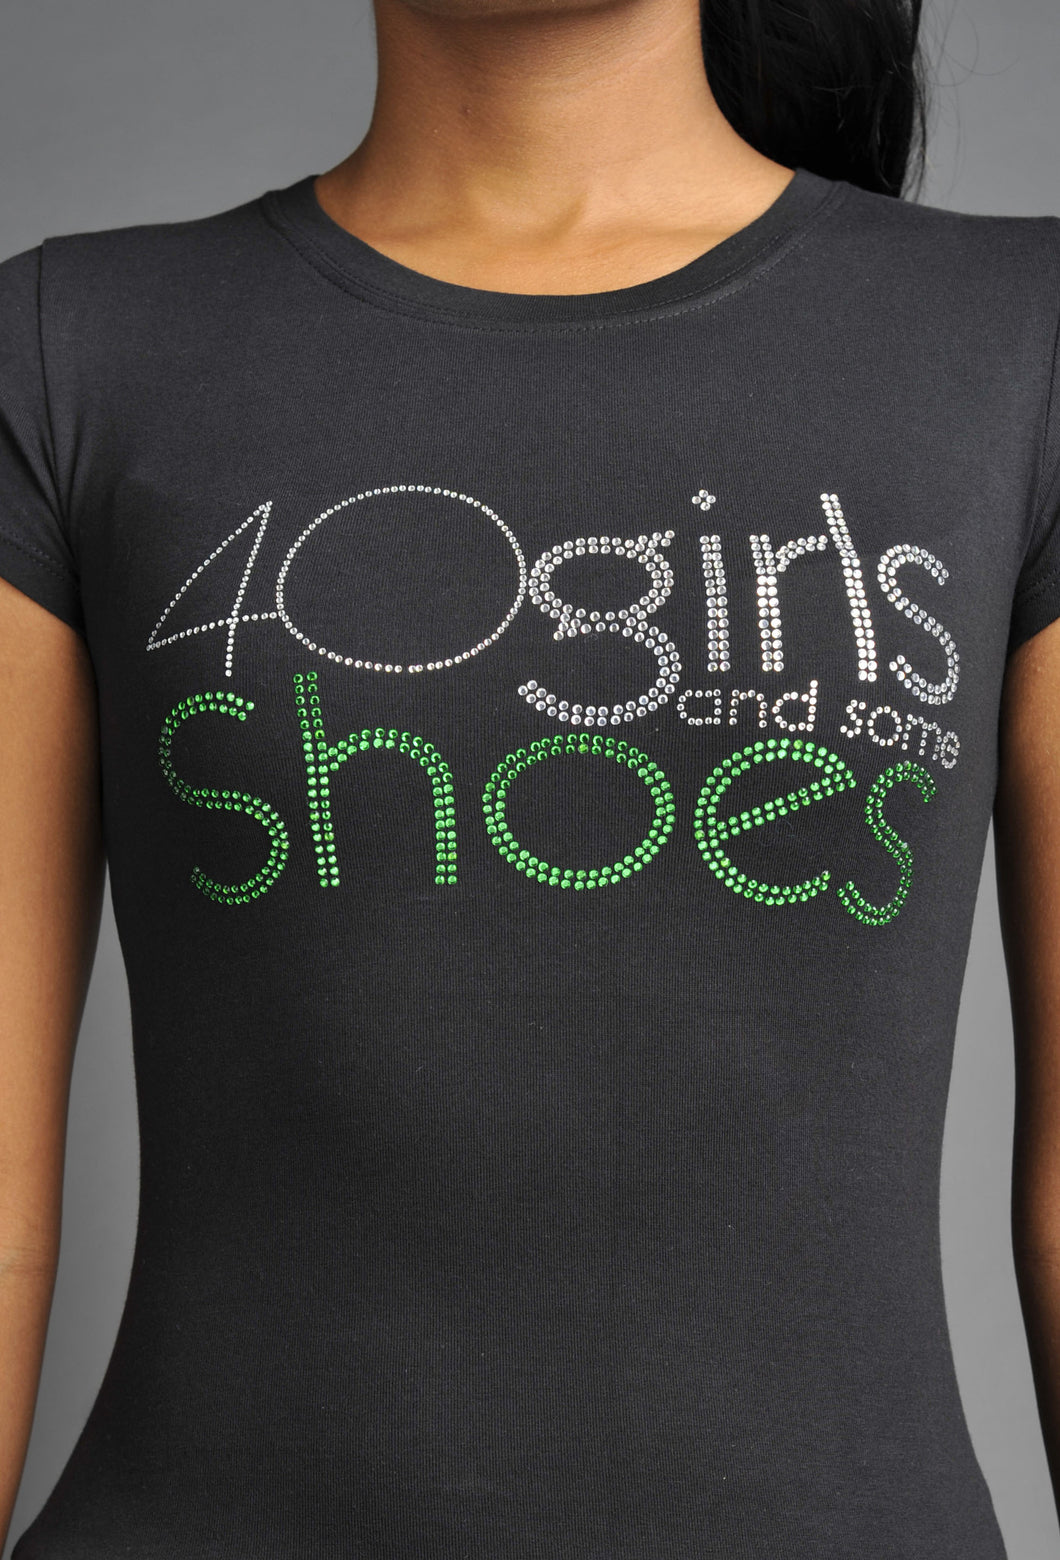 40 Girls And Some Shoes (Green)